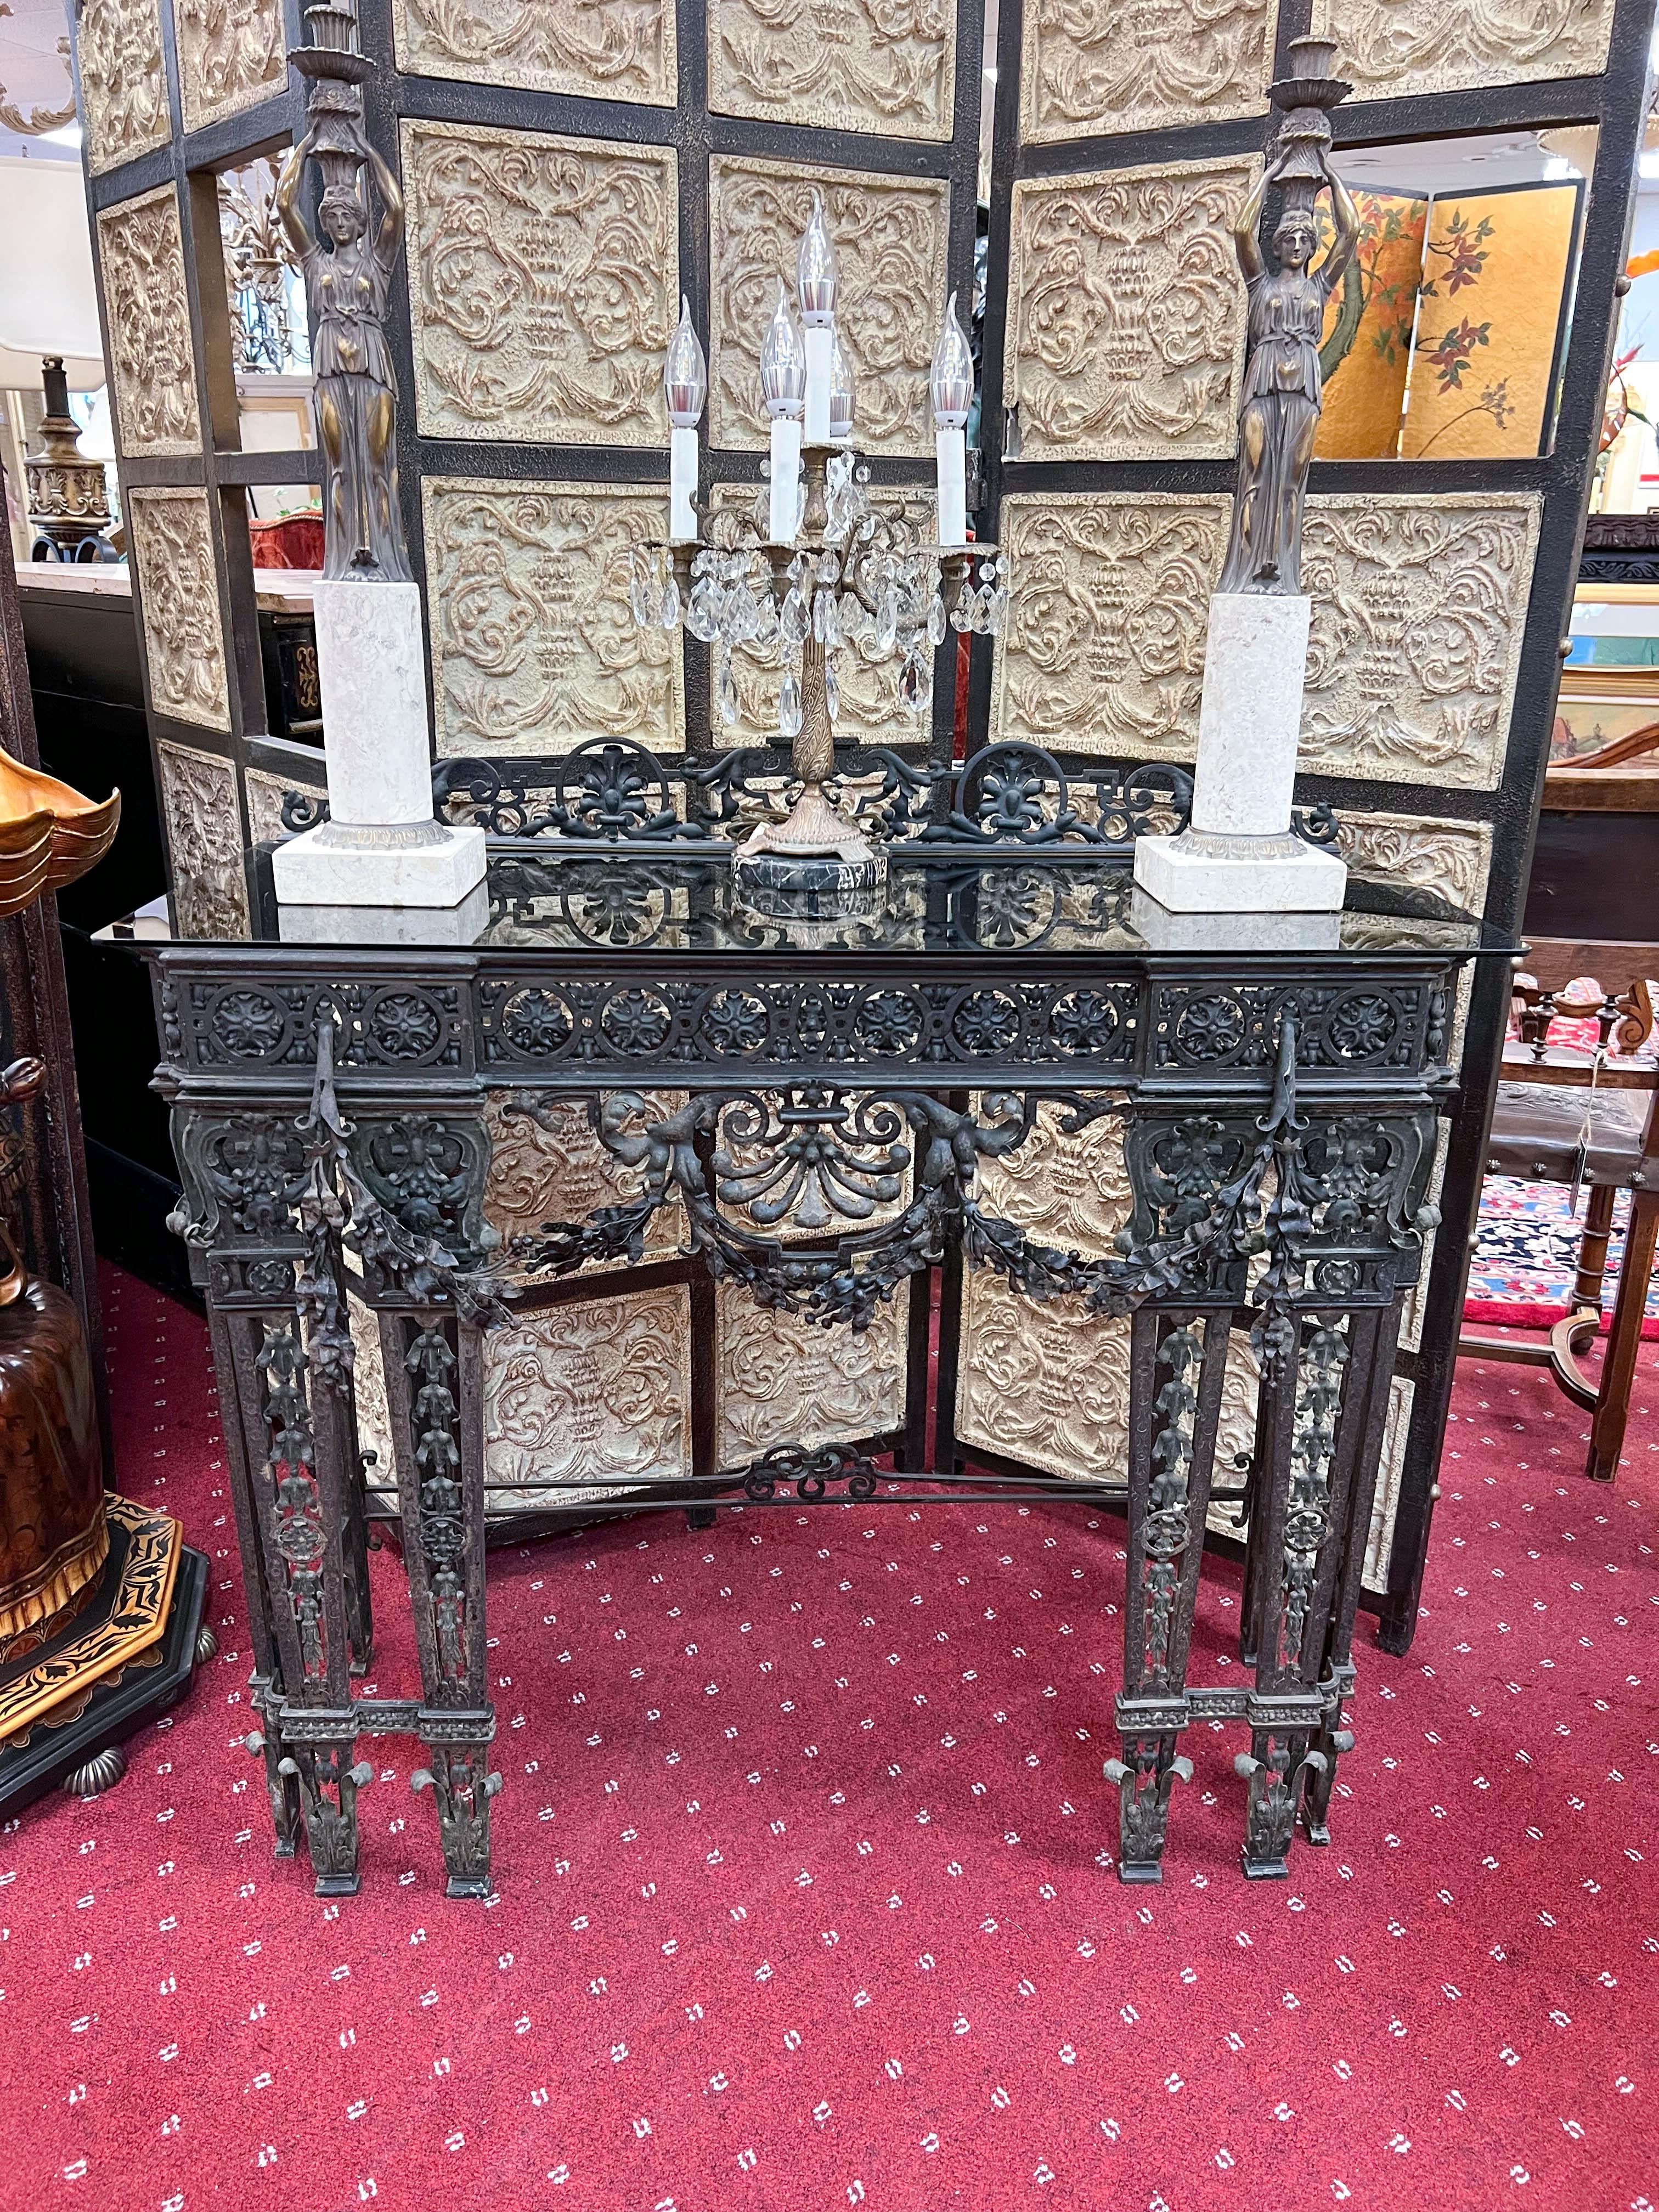 Handcrafted circa 1875 by a metal artist schooled in Europe, the antique wrought iron console table is topped with a 1/4 inch smoky glass.  The delicate metal scroll details throughout and garland along the front apron make this a one-of-a-kind